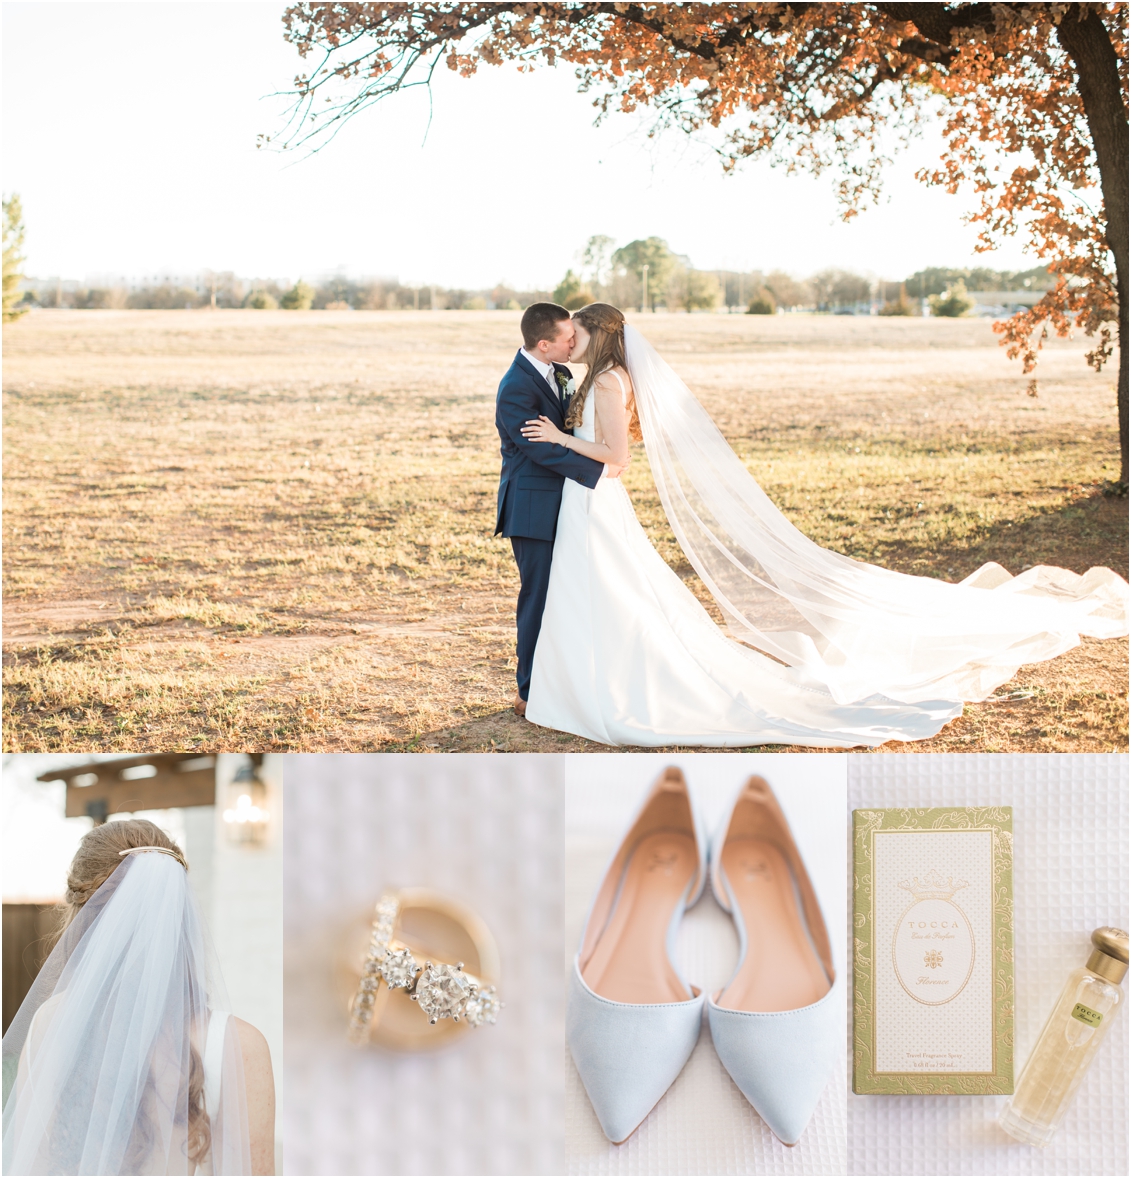 Wedding at Hidden Pines Hurst by Gaby Caskey Photography